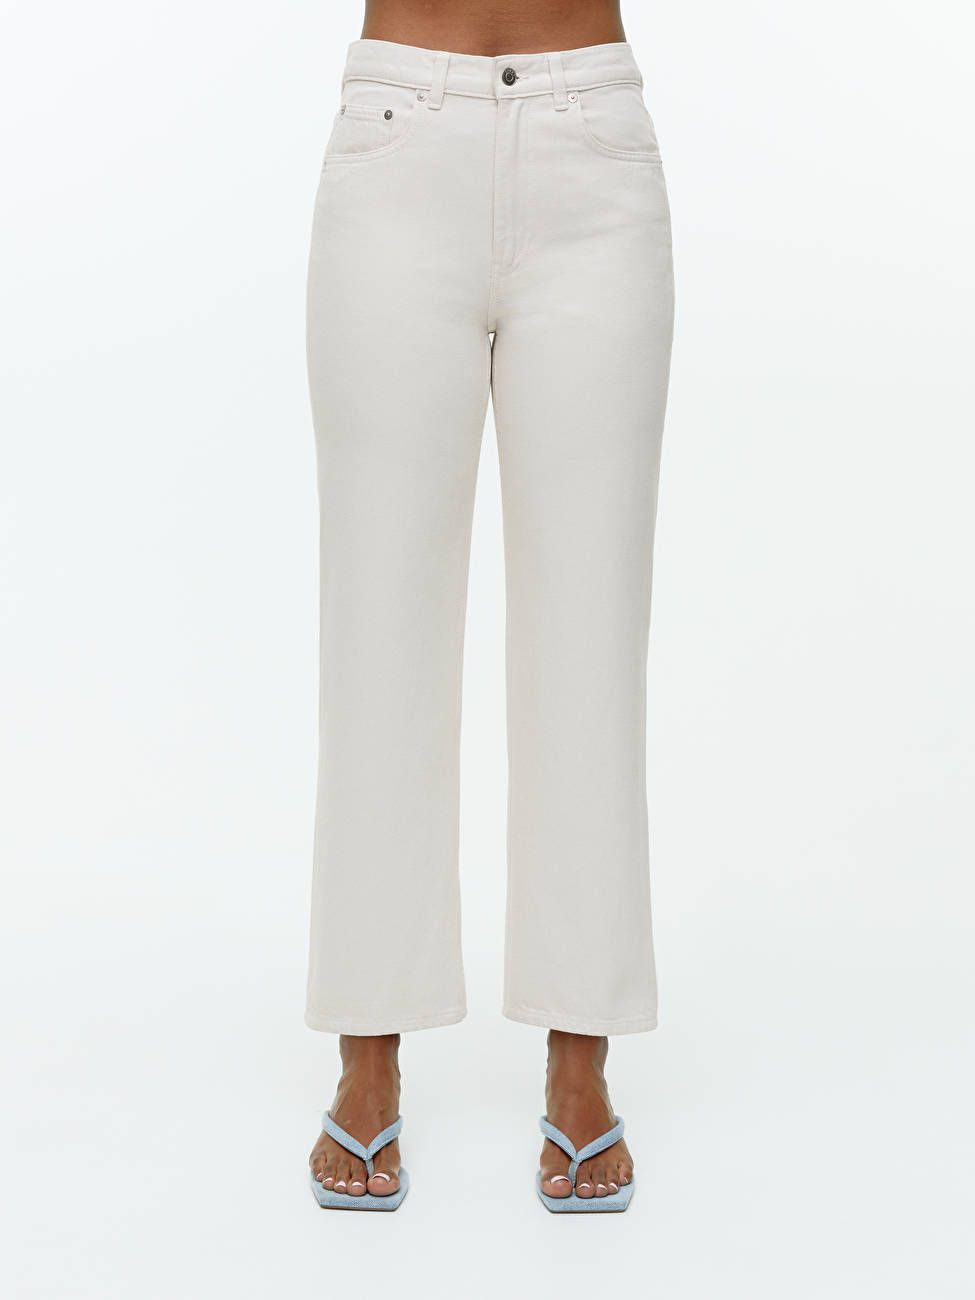 ROSE CROPPED Straight Jeans | ARKET (US&UK)